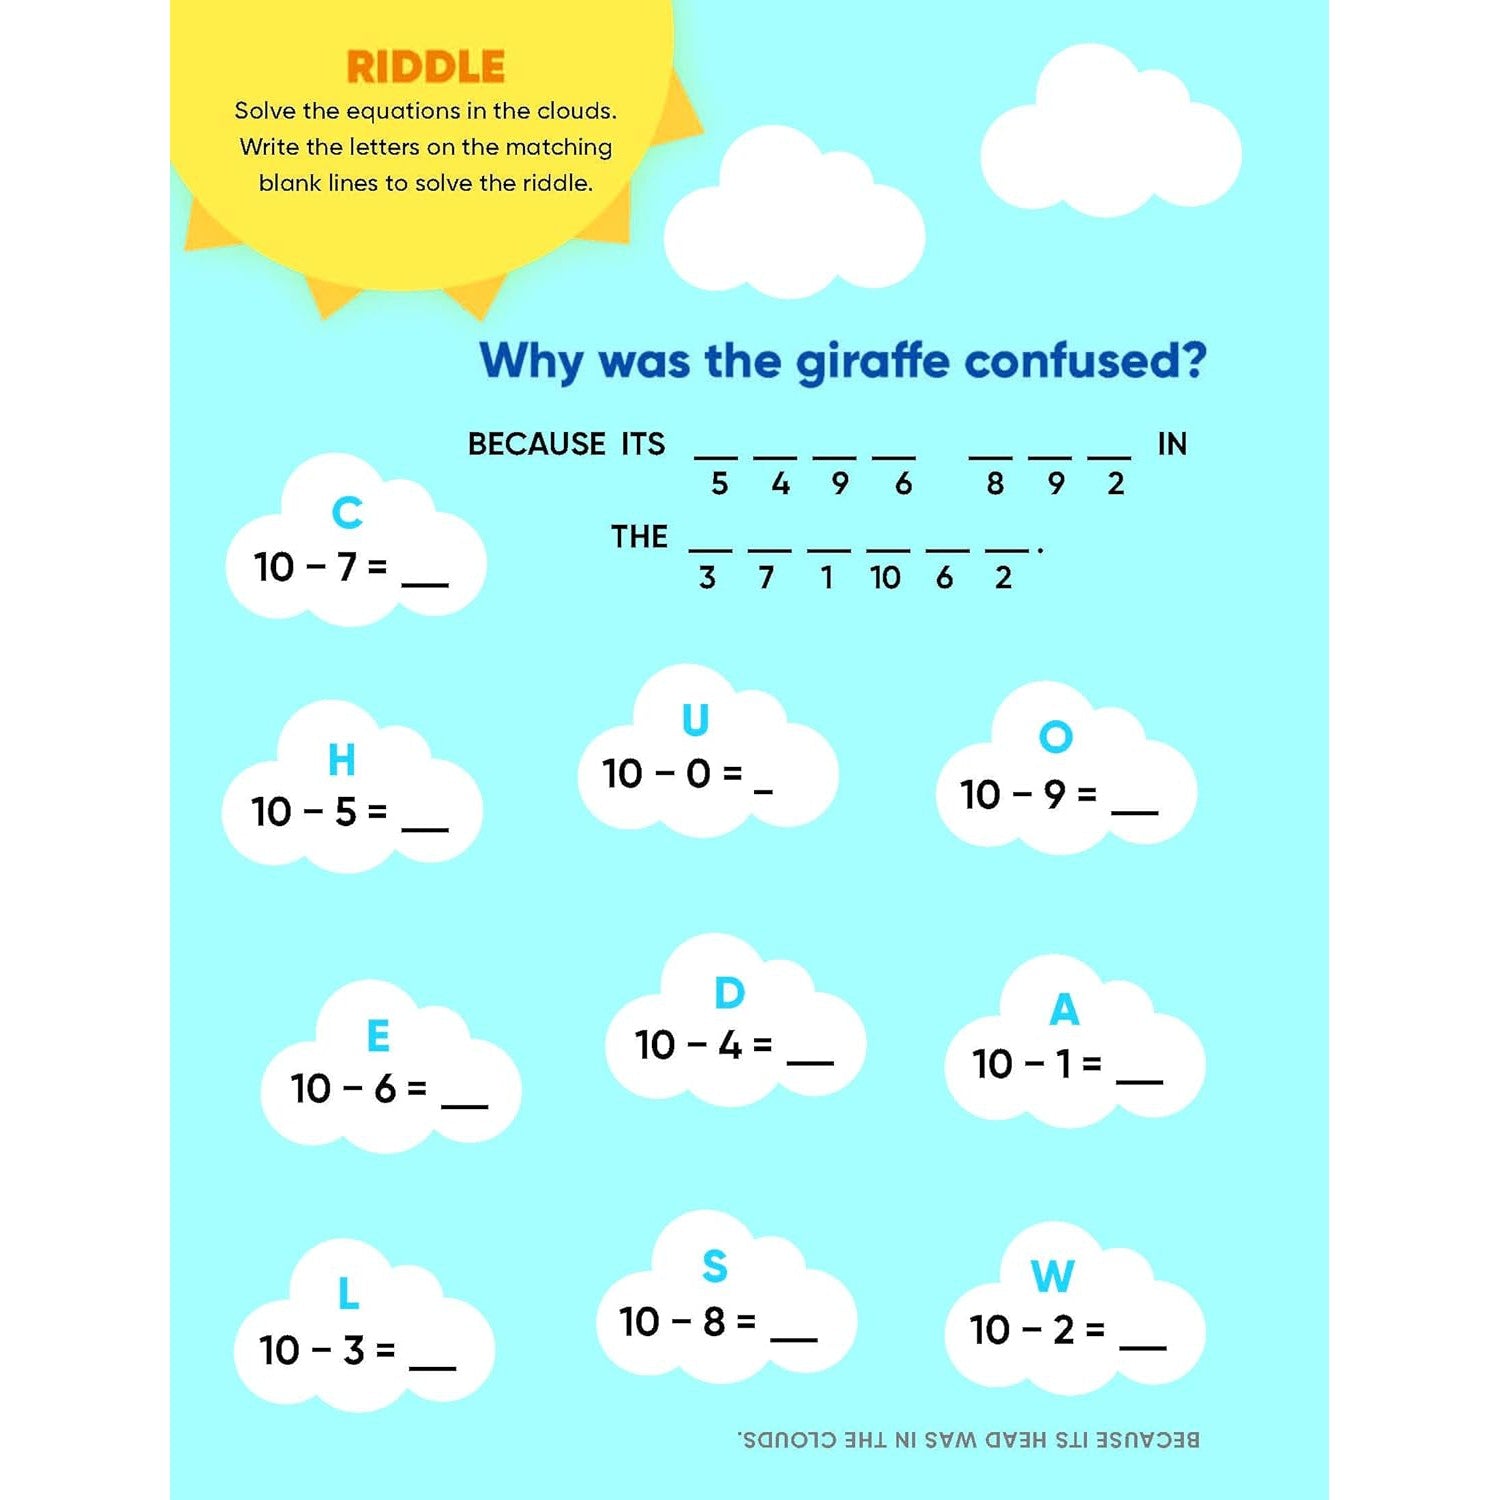 Learn by Sticker: Addition and Subtraction: Use Math to Create 10 Baby Animals!-HACHETTE BOOK GROUP USA-Little Giant Kidz